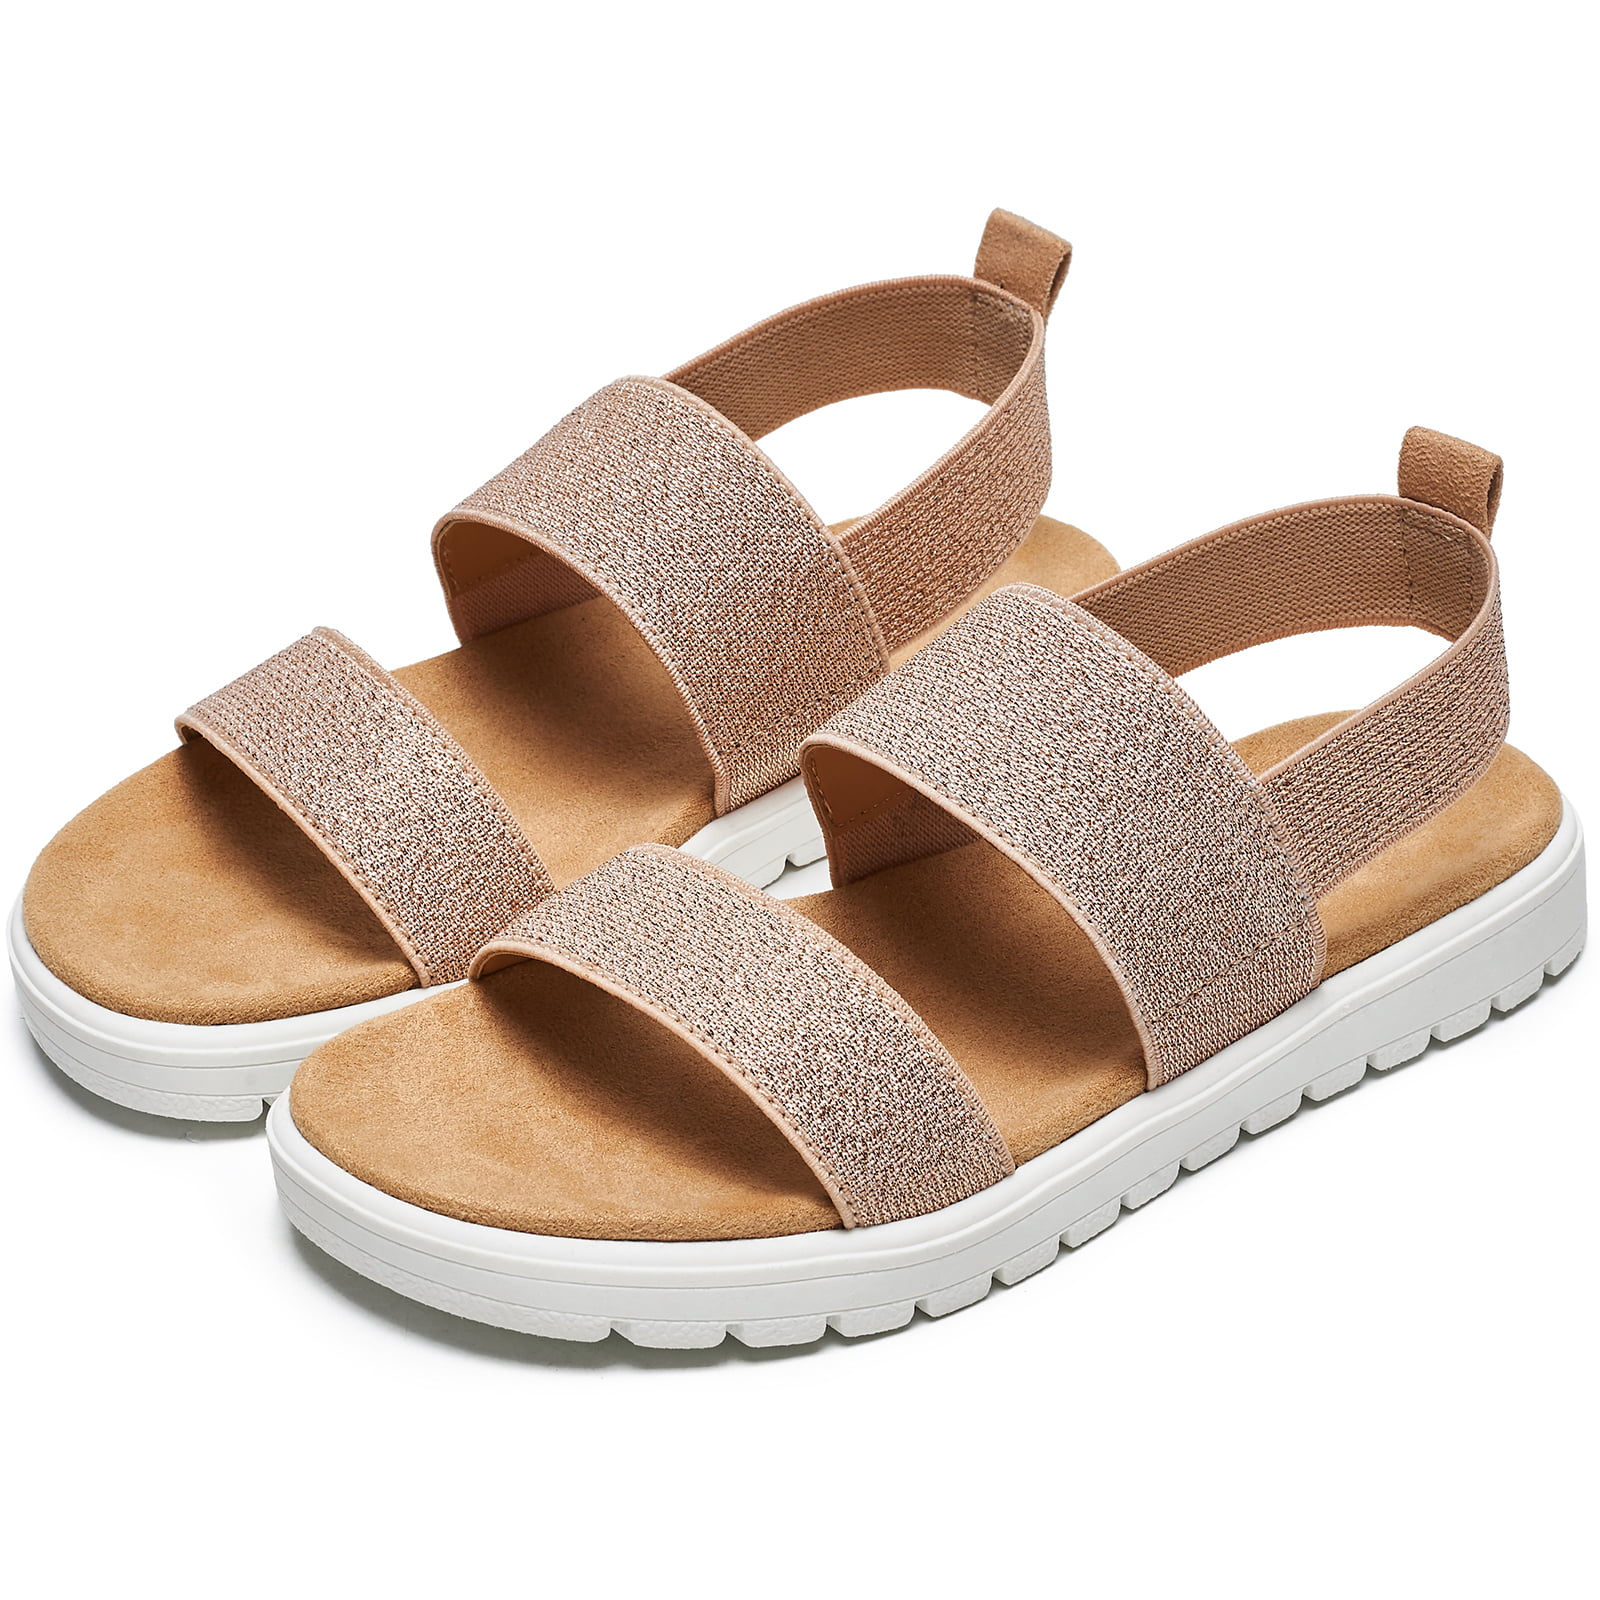 Baviue Fashion Pearl Leather Outdoor Kids Sandals for Girls Sandles